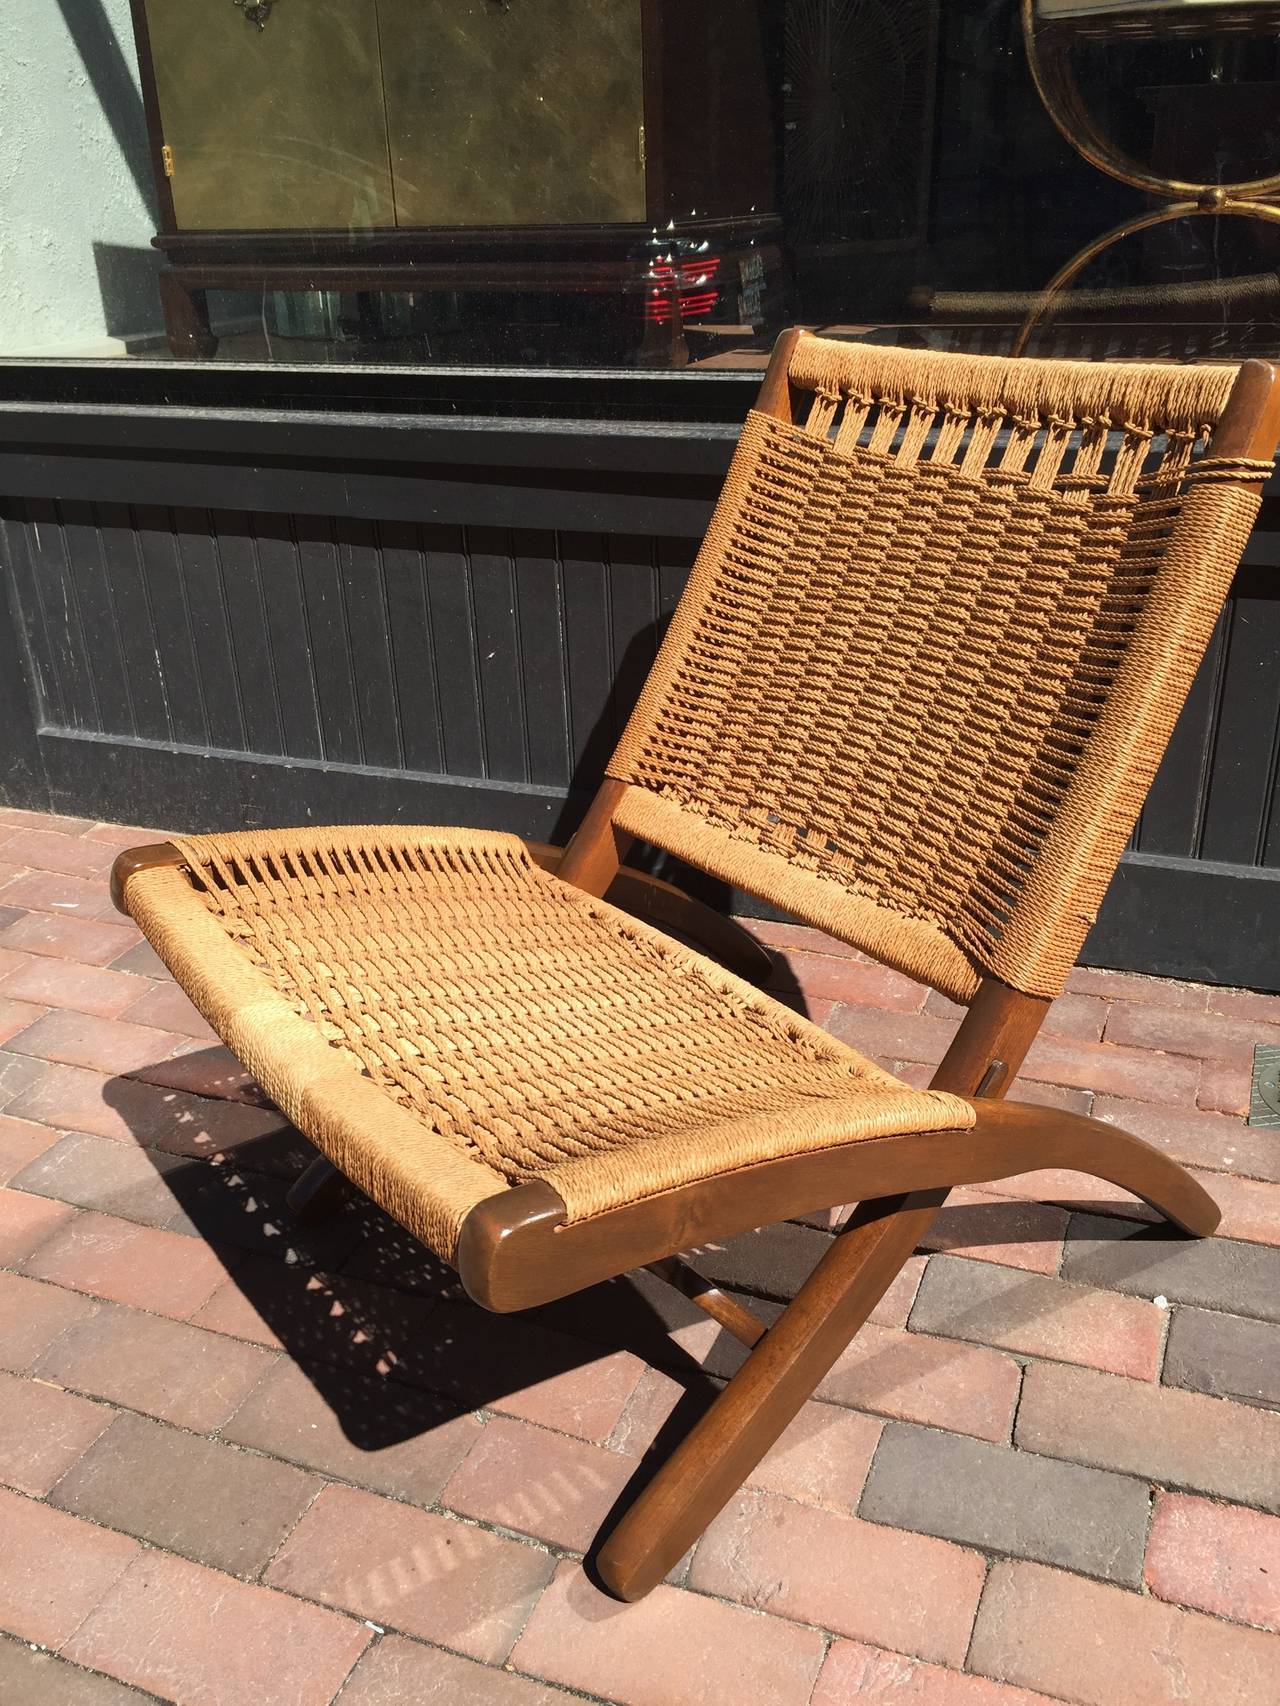 Hans Wegner Style Folding Chair, of typical form with intricate rope woven seat and backrest